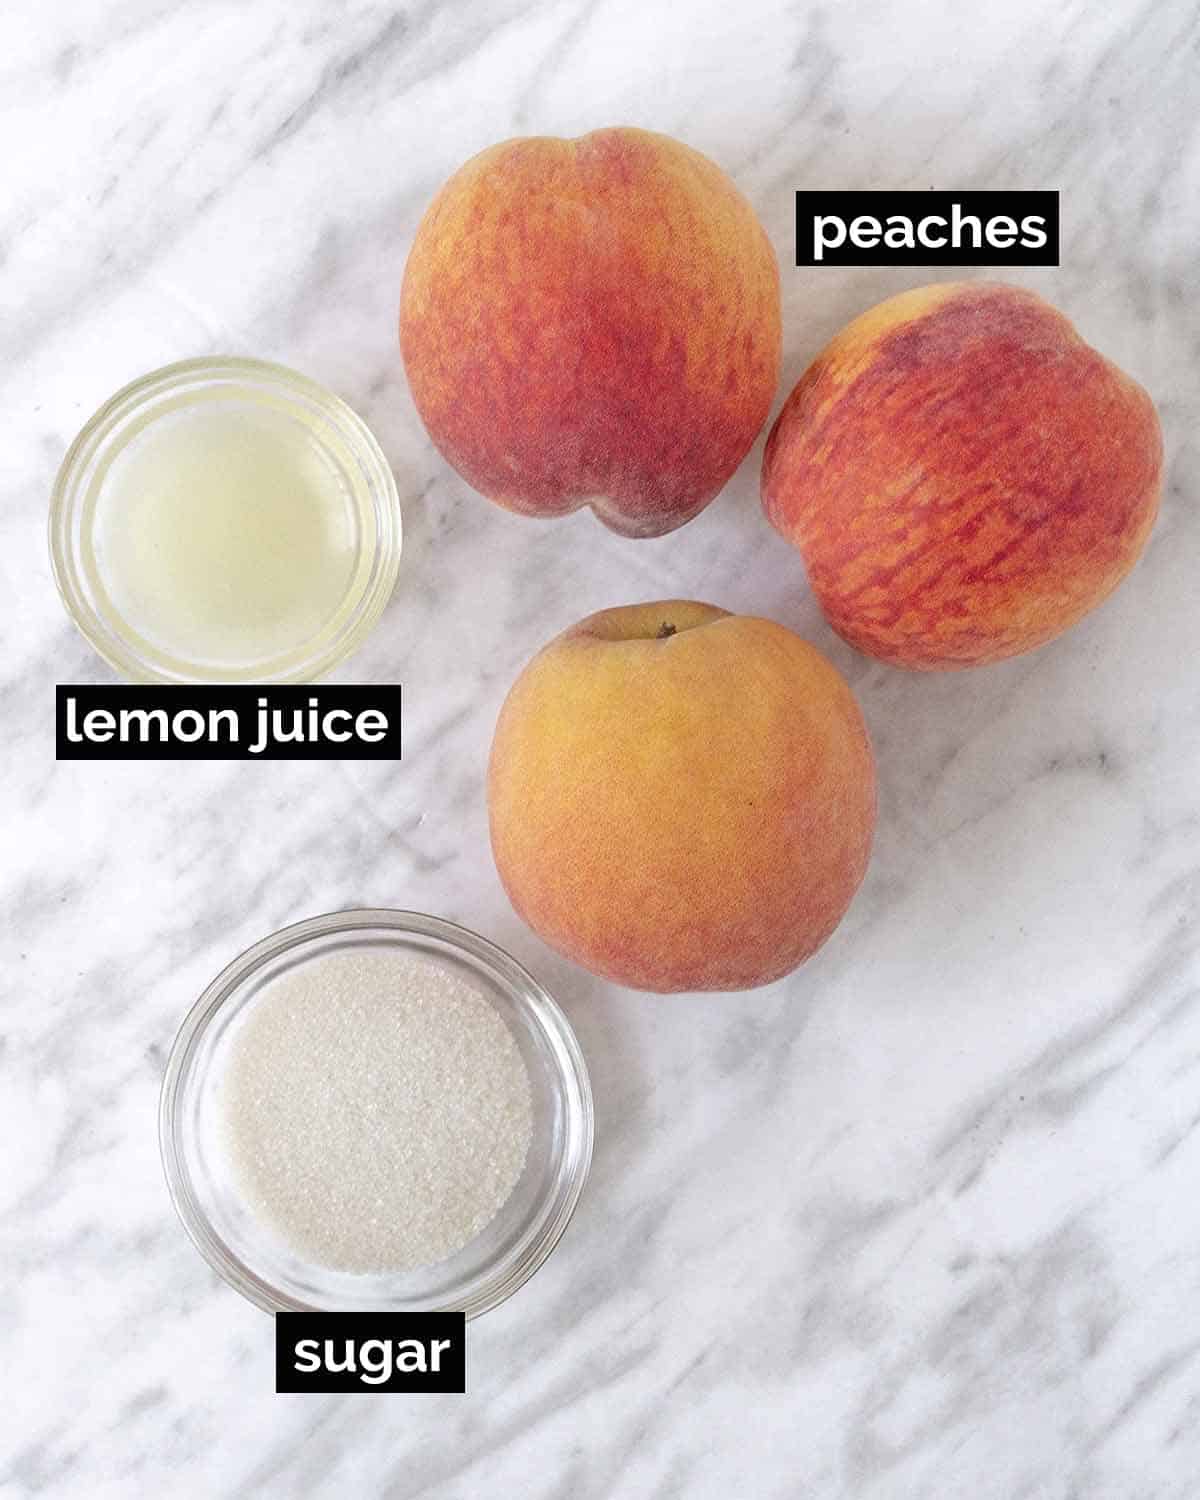 An overhead shot showing the ingredients needed to make peach sauce.